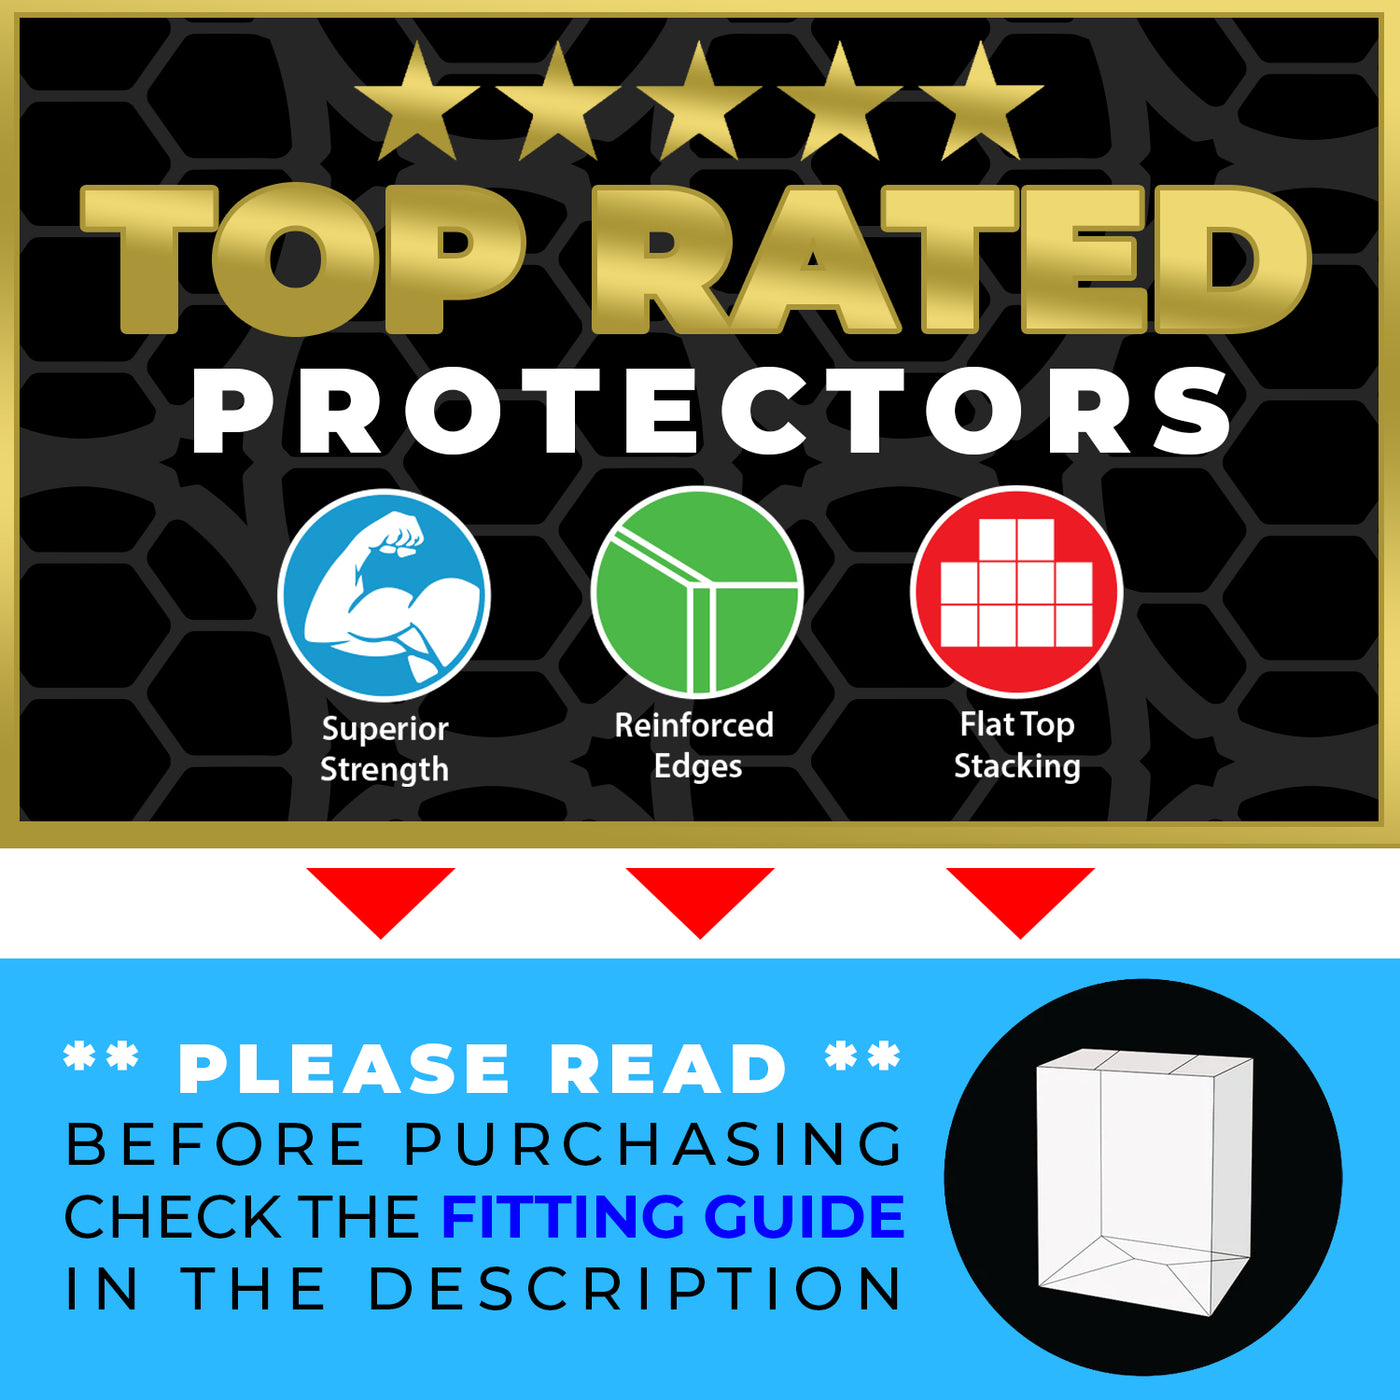 loungefly bag best funko pop protectors thick strong uv scratch flat top stack vinyl display geek plastic shield vaulted eco armor fits collect protect display case kollector protector